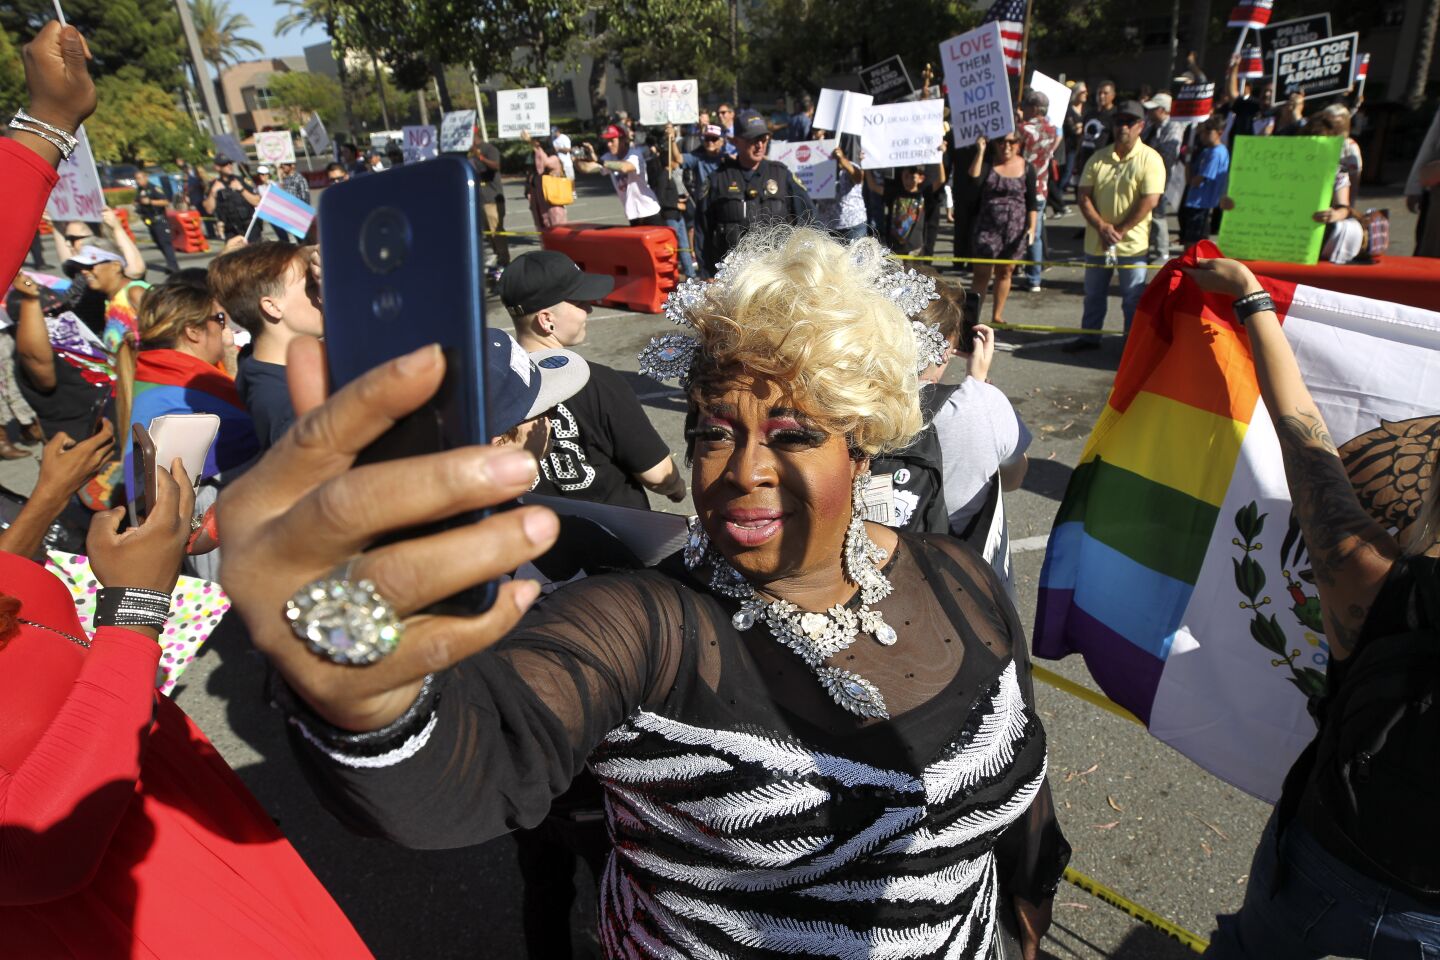 Gigi Masters goes live on FaceBook while standing with supporters of the Drag Queen Story Hour at the Chula Vista Public Library, Civic Center Branch, on Tuesday, September 10, 2019 in Chula Vista, California.